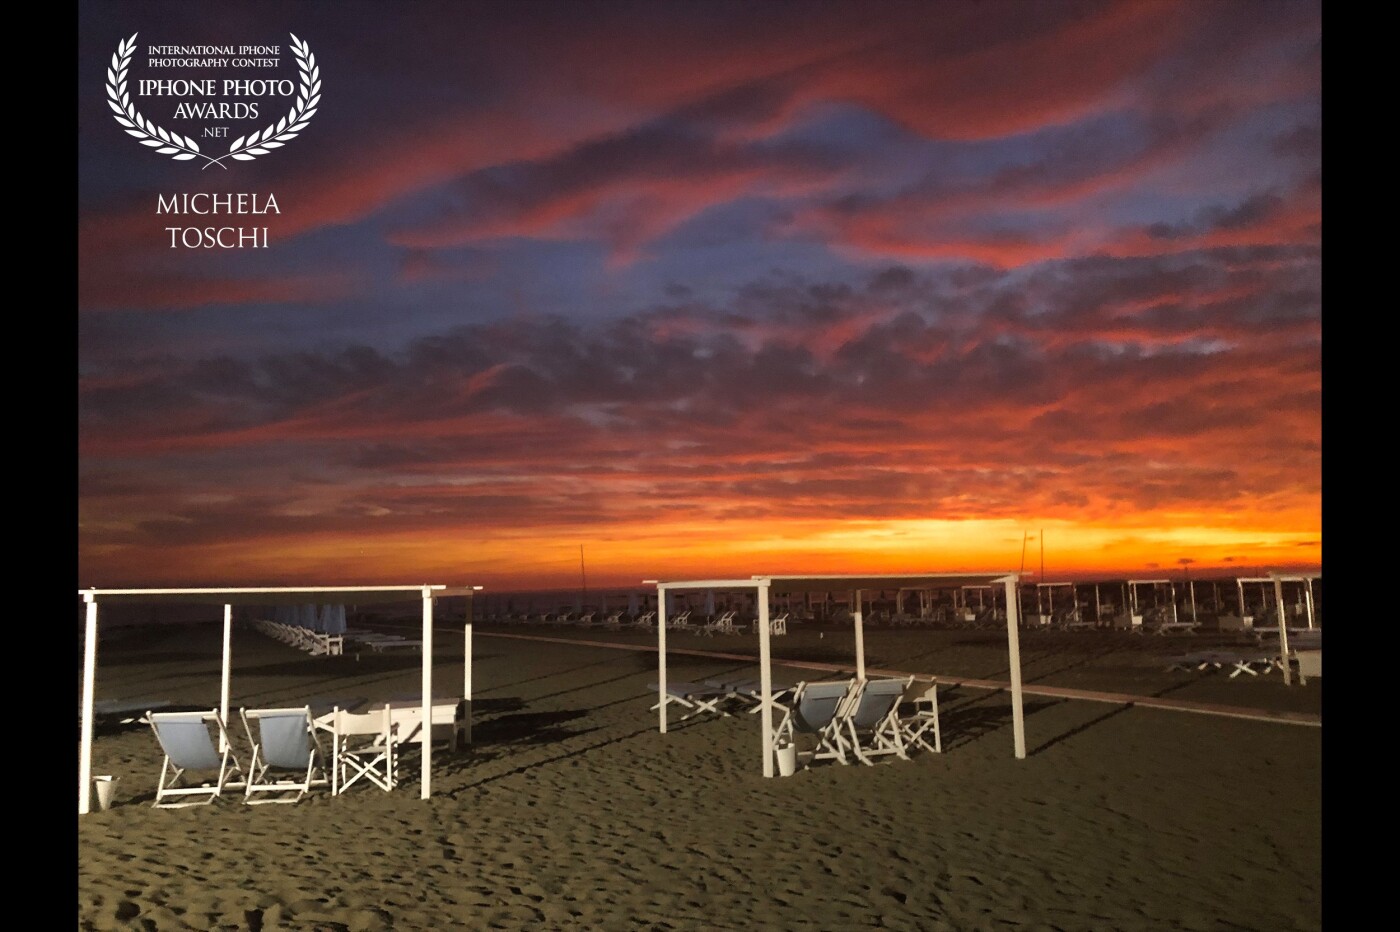 Tuscany. Forte dei Marmi. A play of lights and a breathtaking scenery. The evening light comes on illuminating the first tents and the beach. In the background an extraordinary sunset.